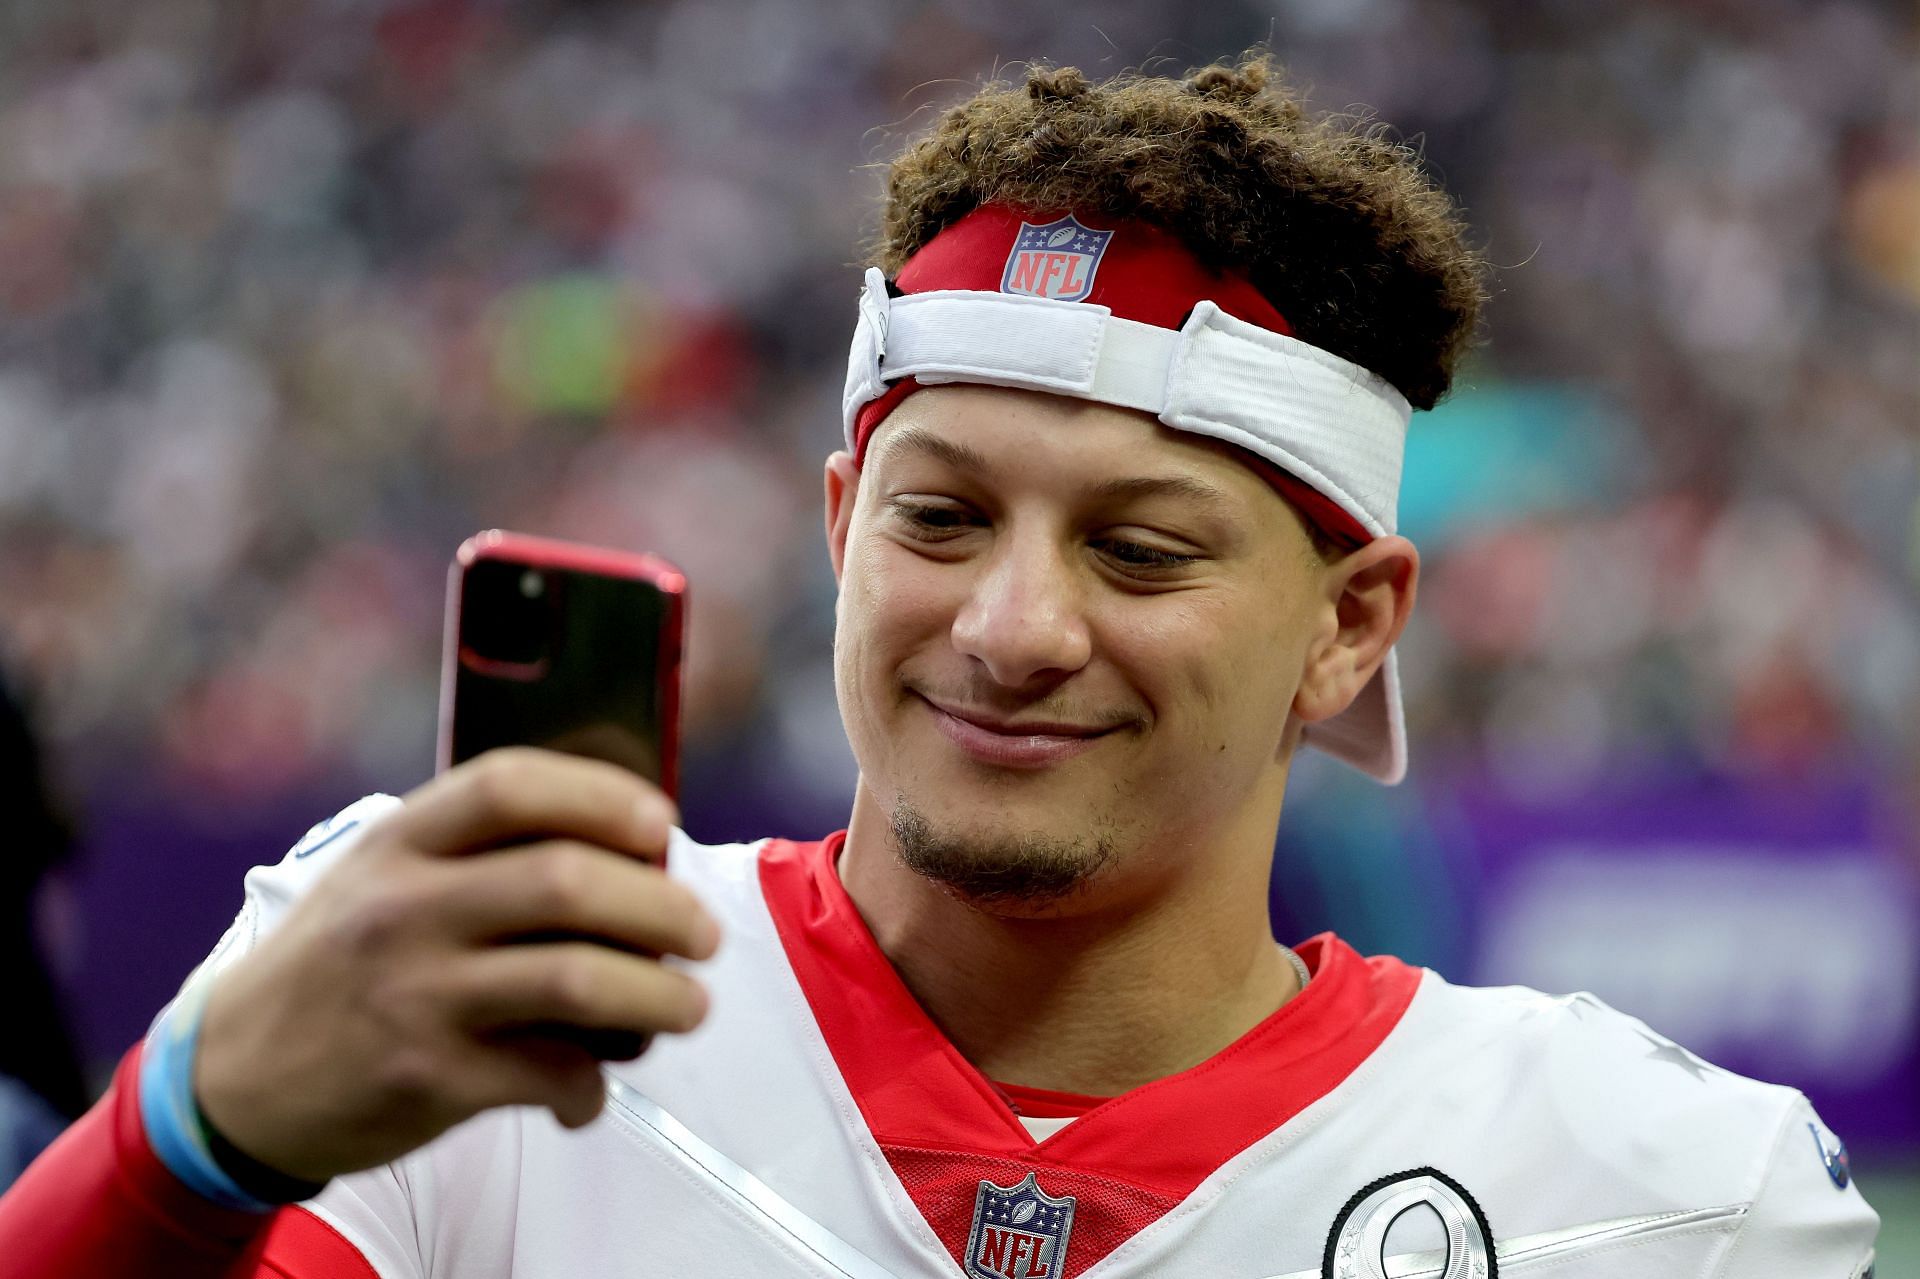 NFL Pro Bowl which involved Patrick Mahomes